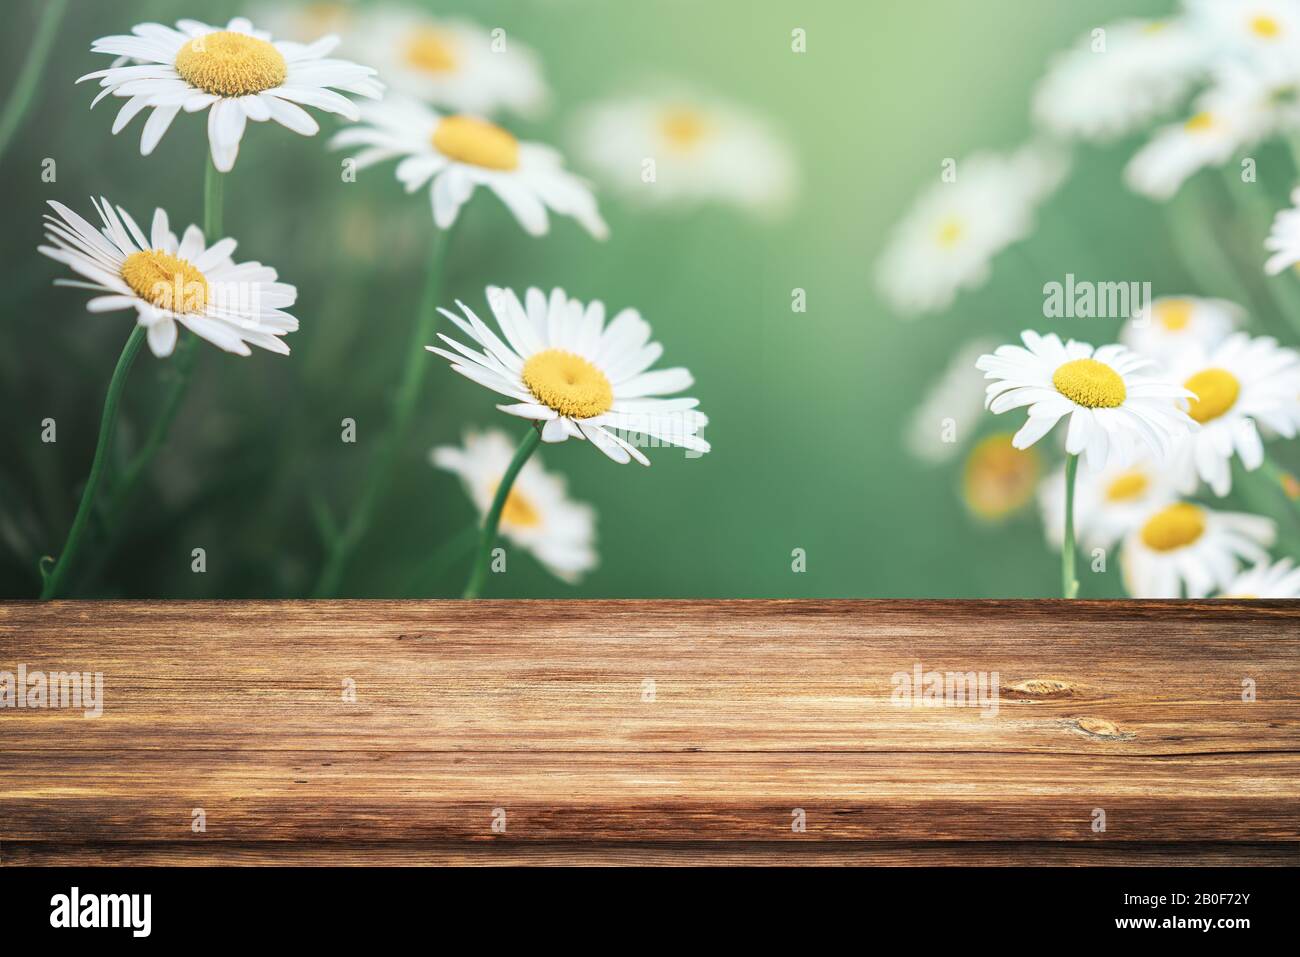 Beautiful spring background with white daisy flowers and empty wooden table in nature outdoor. Natural template with sunlight Stock Photo